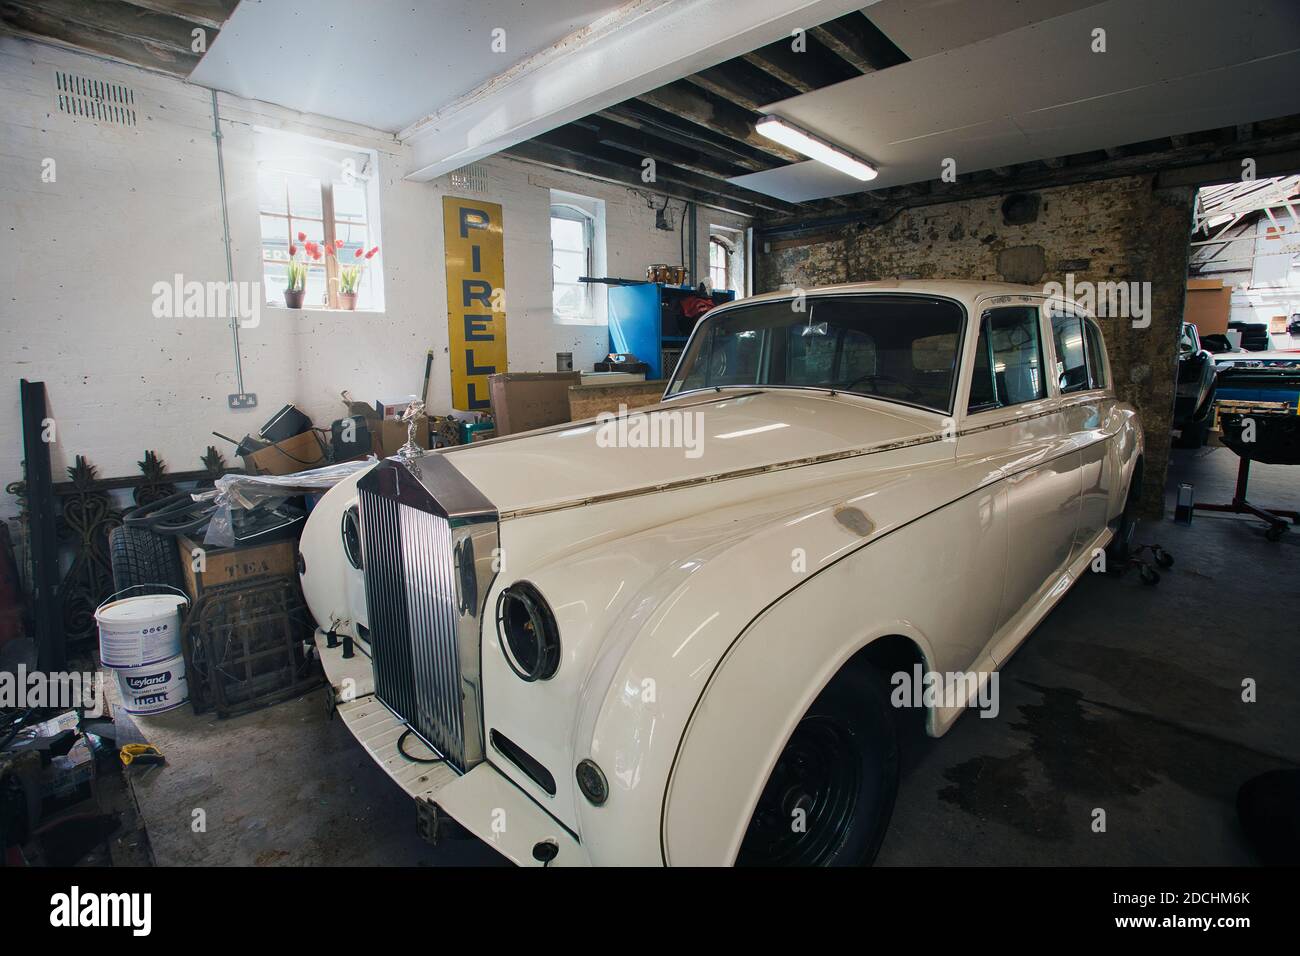 rolls royce car partly taken apart/stripped down for restoration in a domestic garage/workshop. Stock Photo